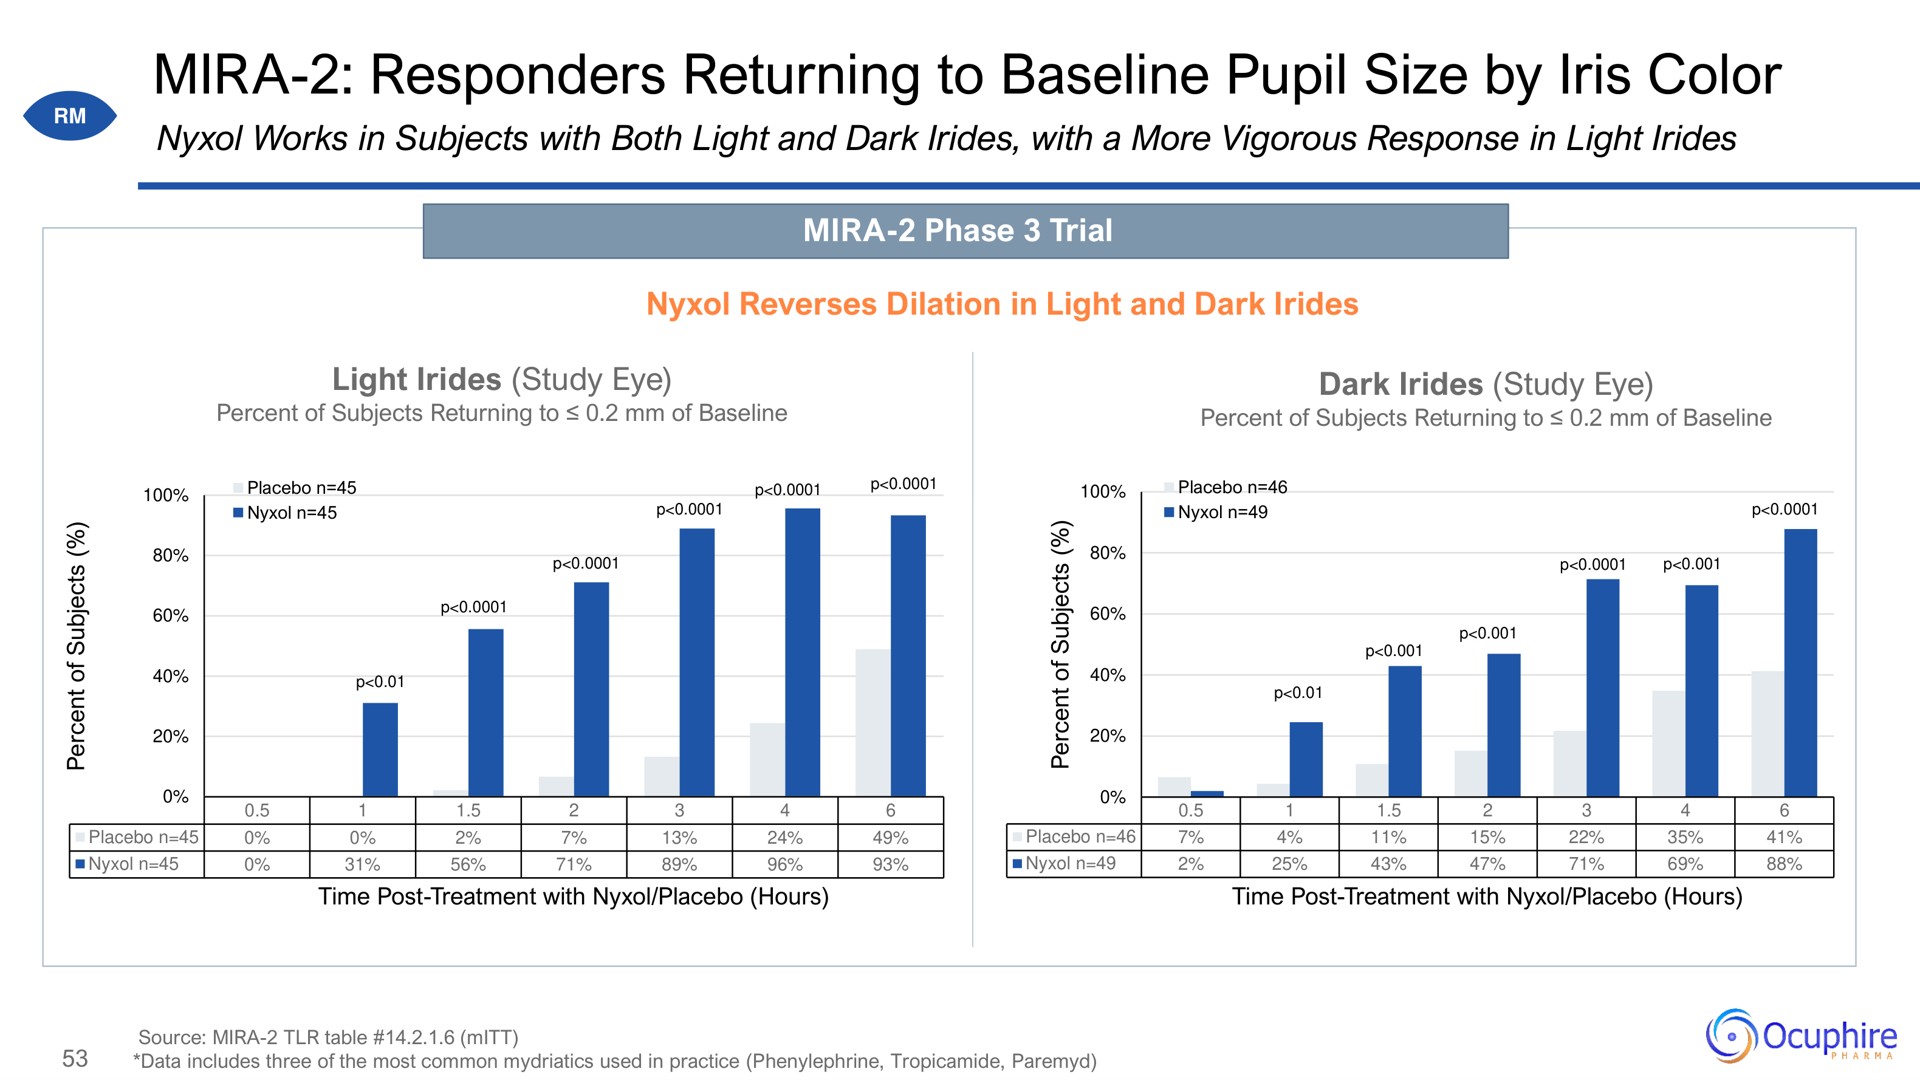 responders returning to pupil size by iris color | Ocuphire Pharma